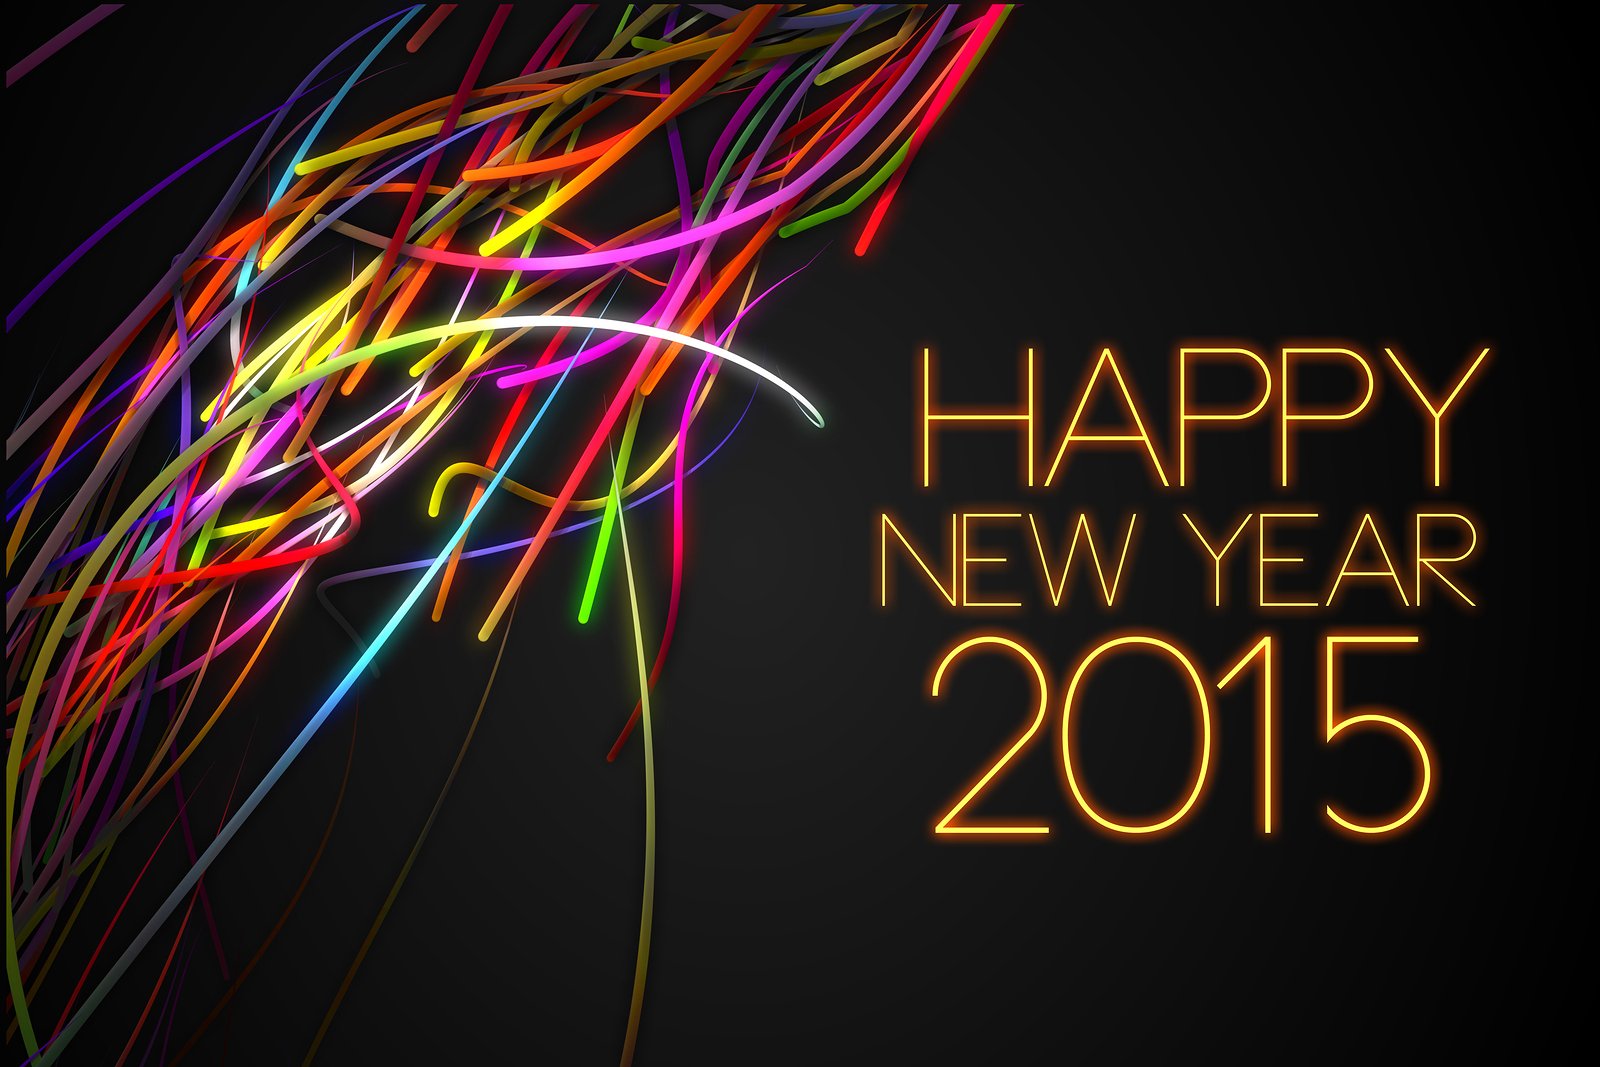 2015 Happy New Year Images Free Download: HD Background Wallpapers